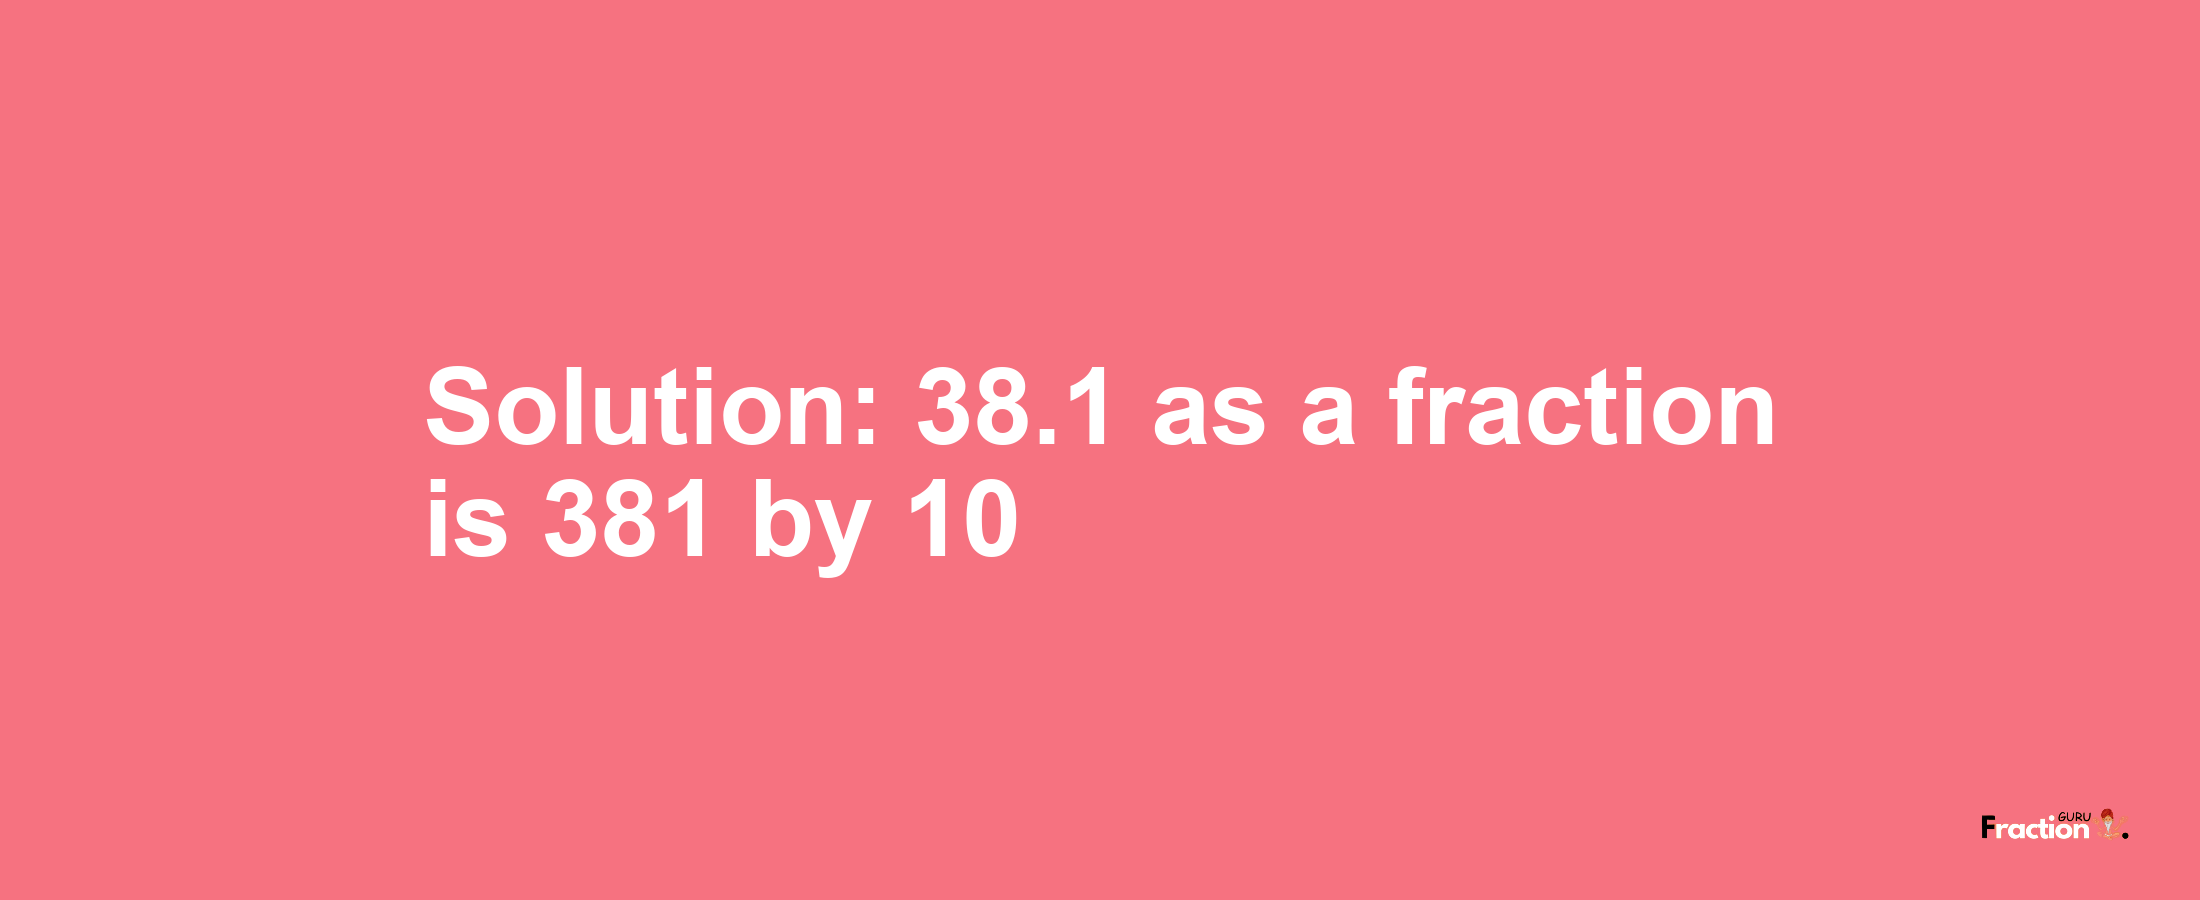 Solution:38.1 as a fraction is 381/10